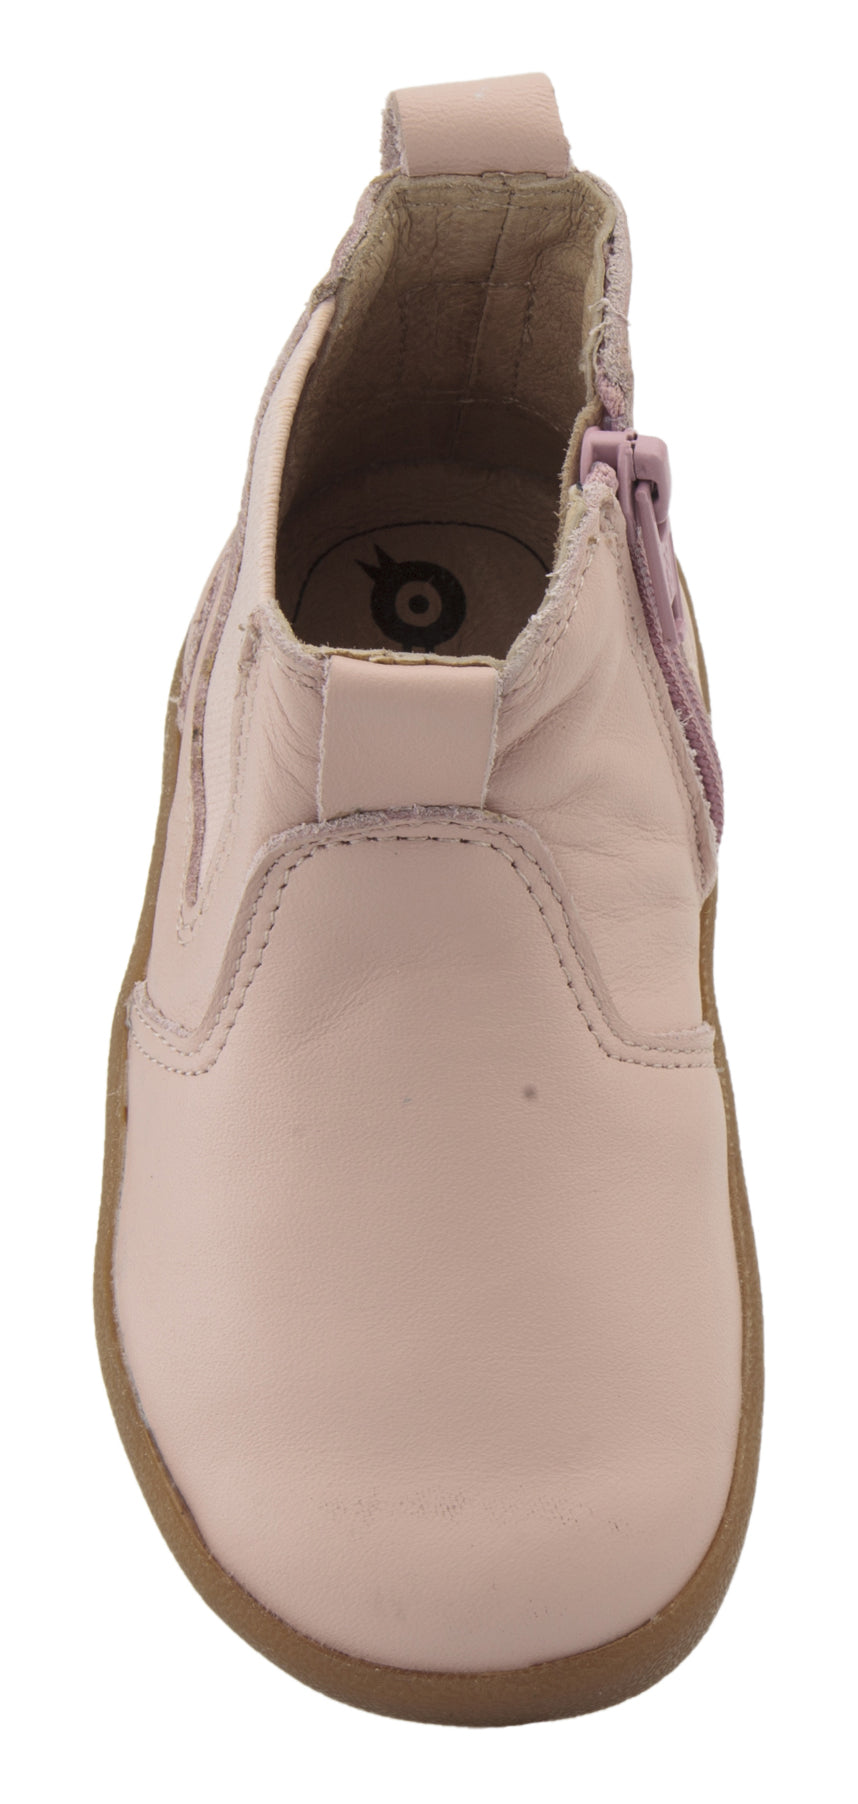 Old Soles Girl's 5064 Slip On High Top Ankle Boot Sneaker - Powder Pink